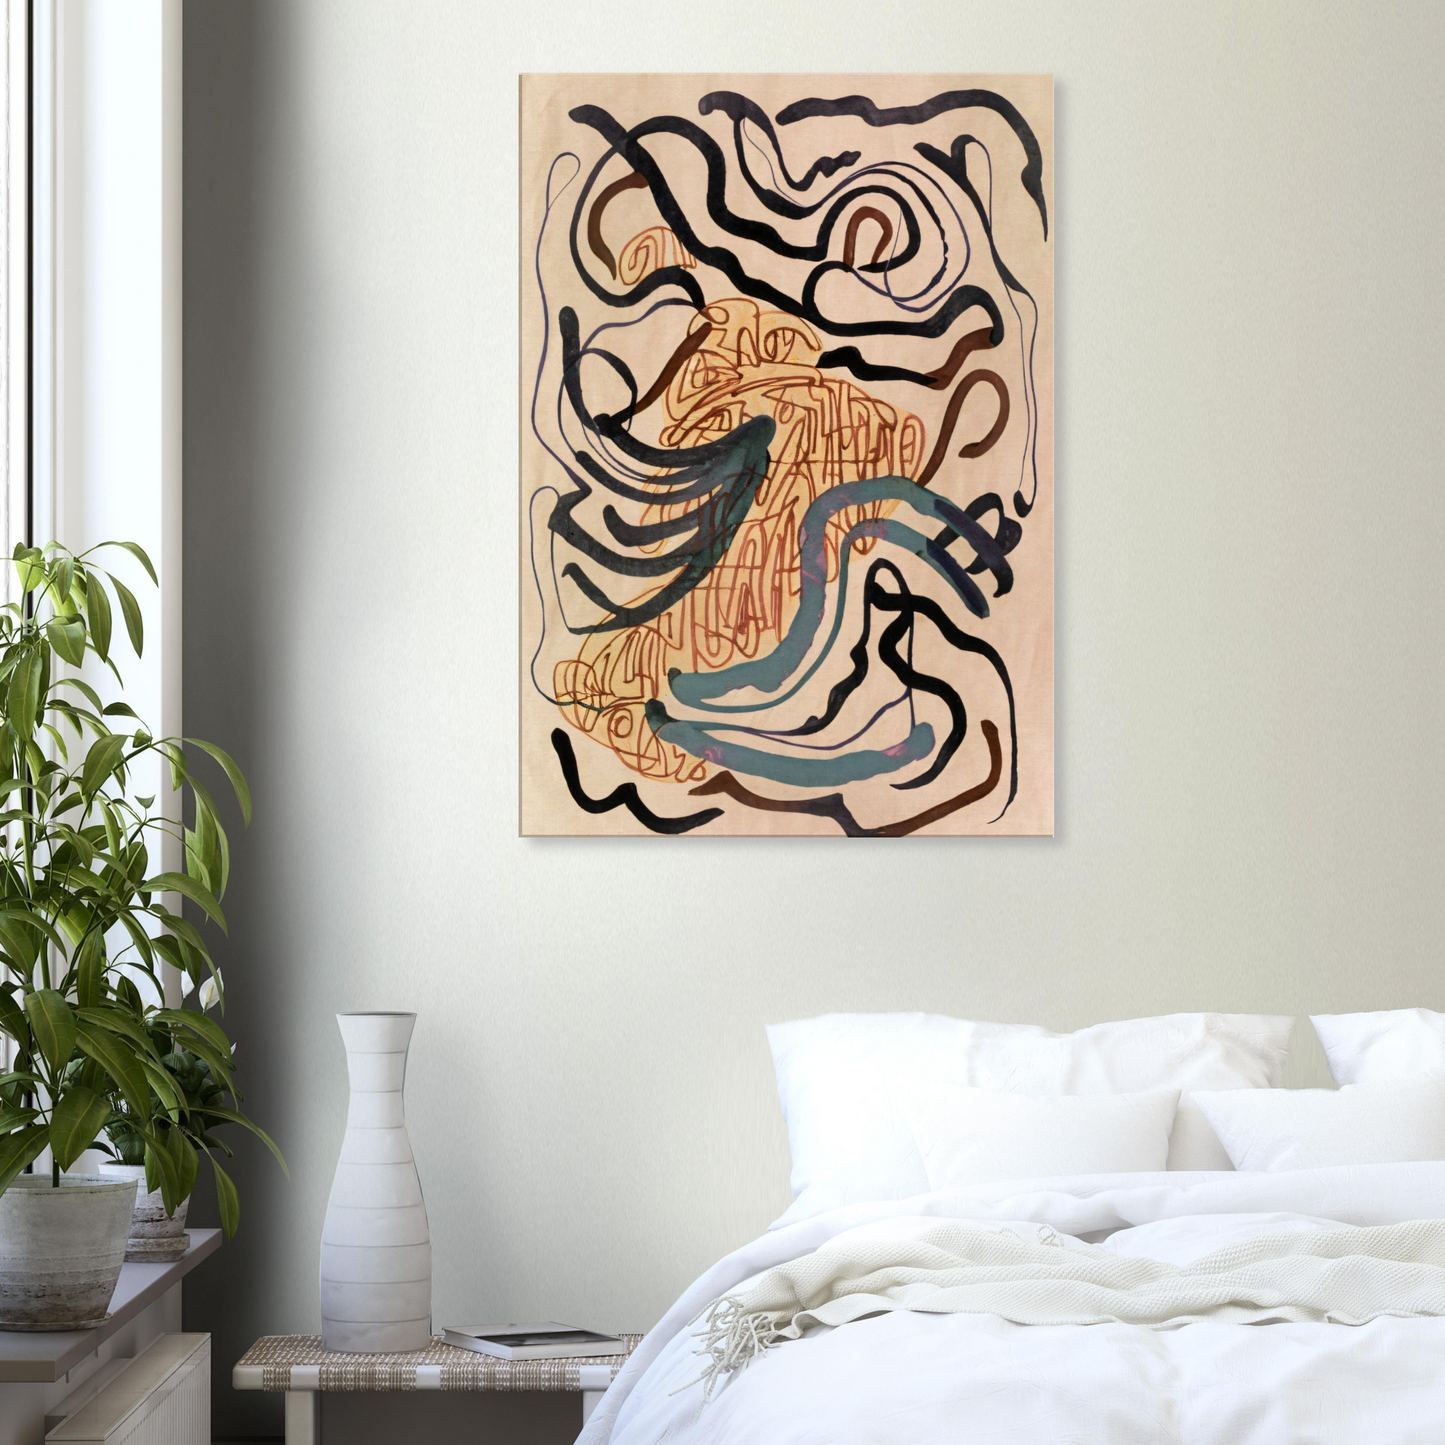 Canvas Print with line drawing by Posterify Design - Posterify